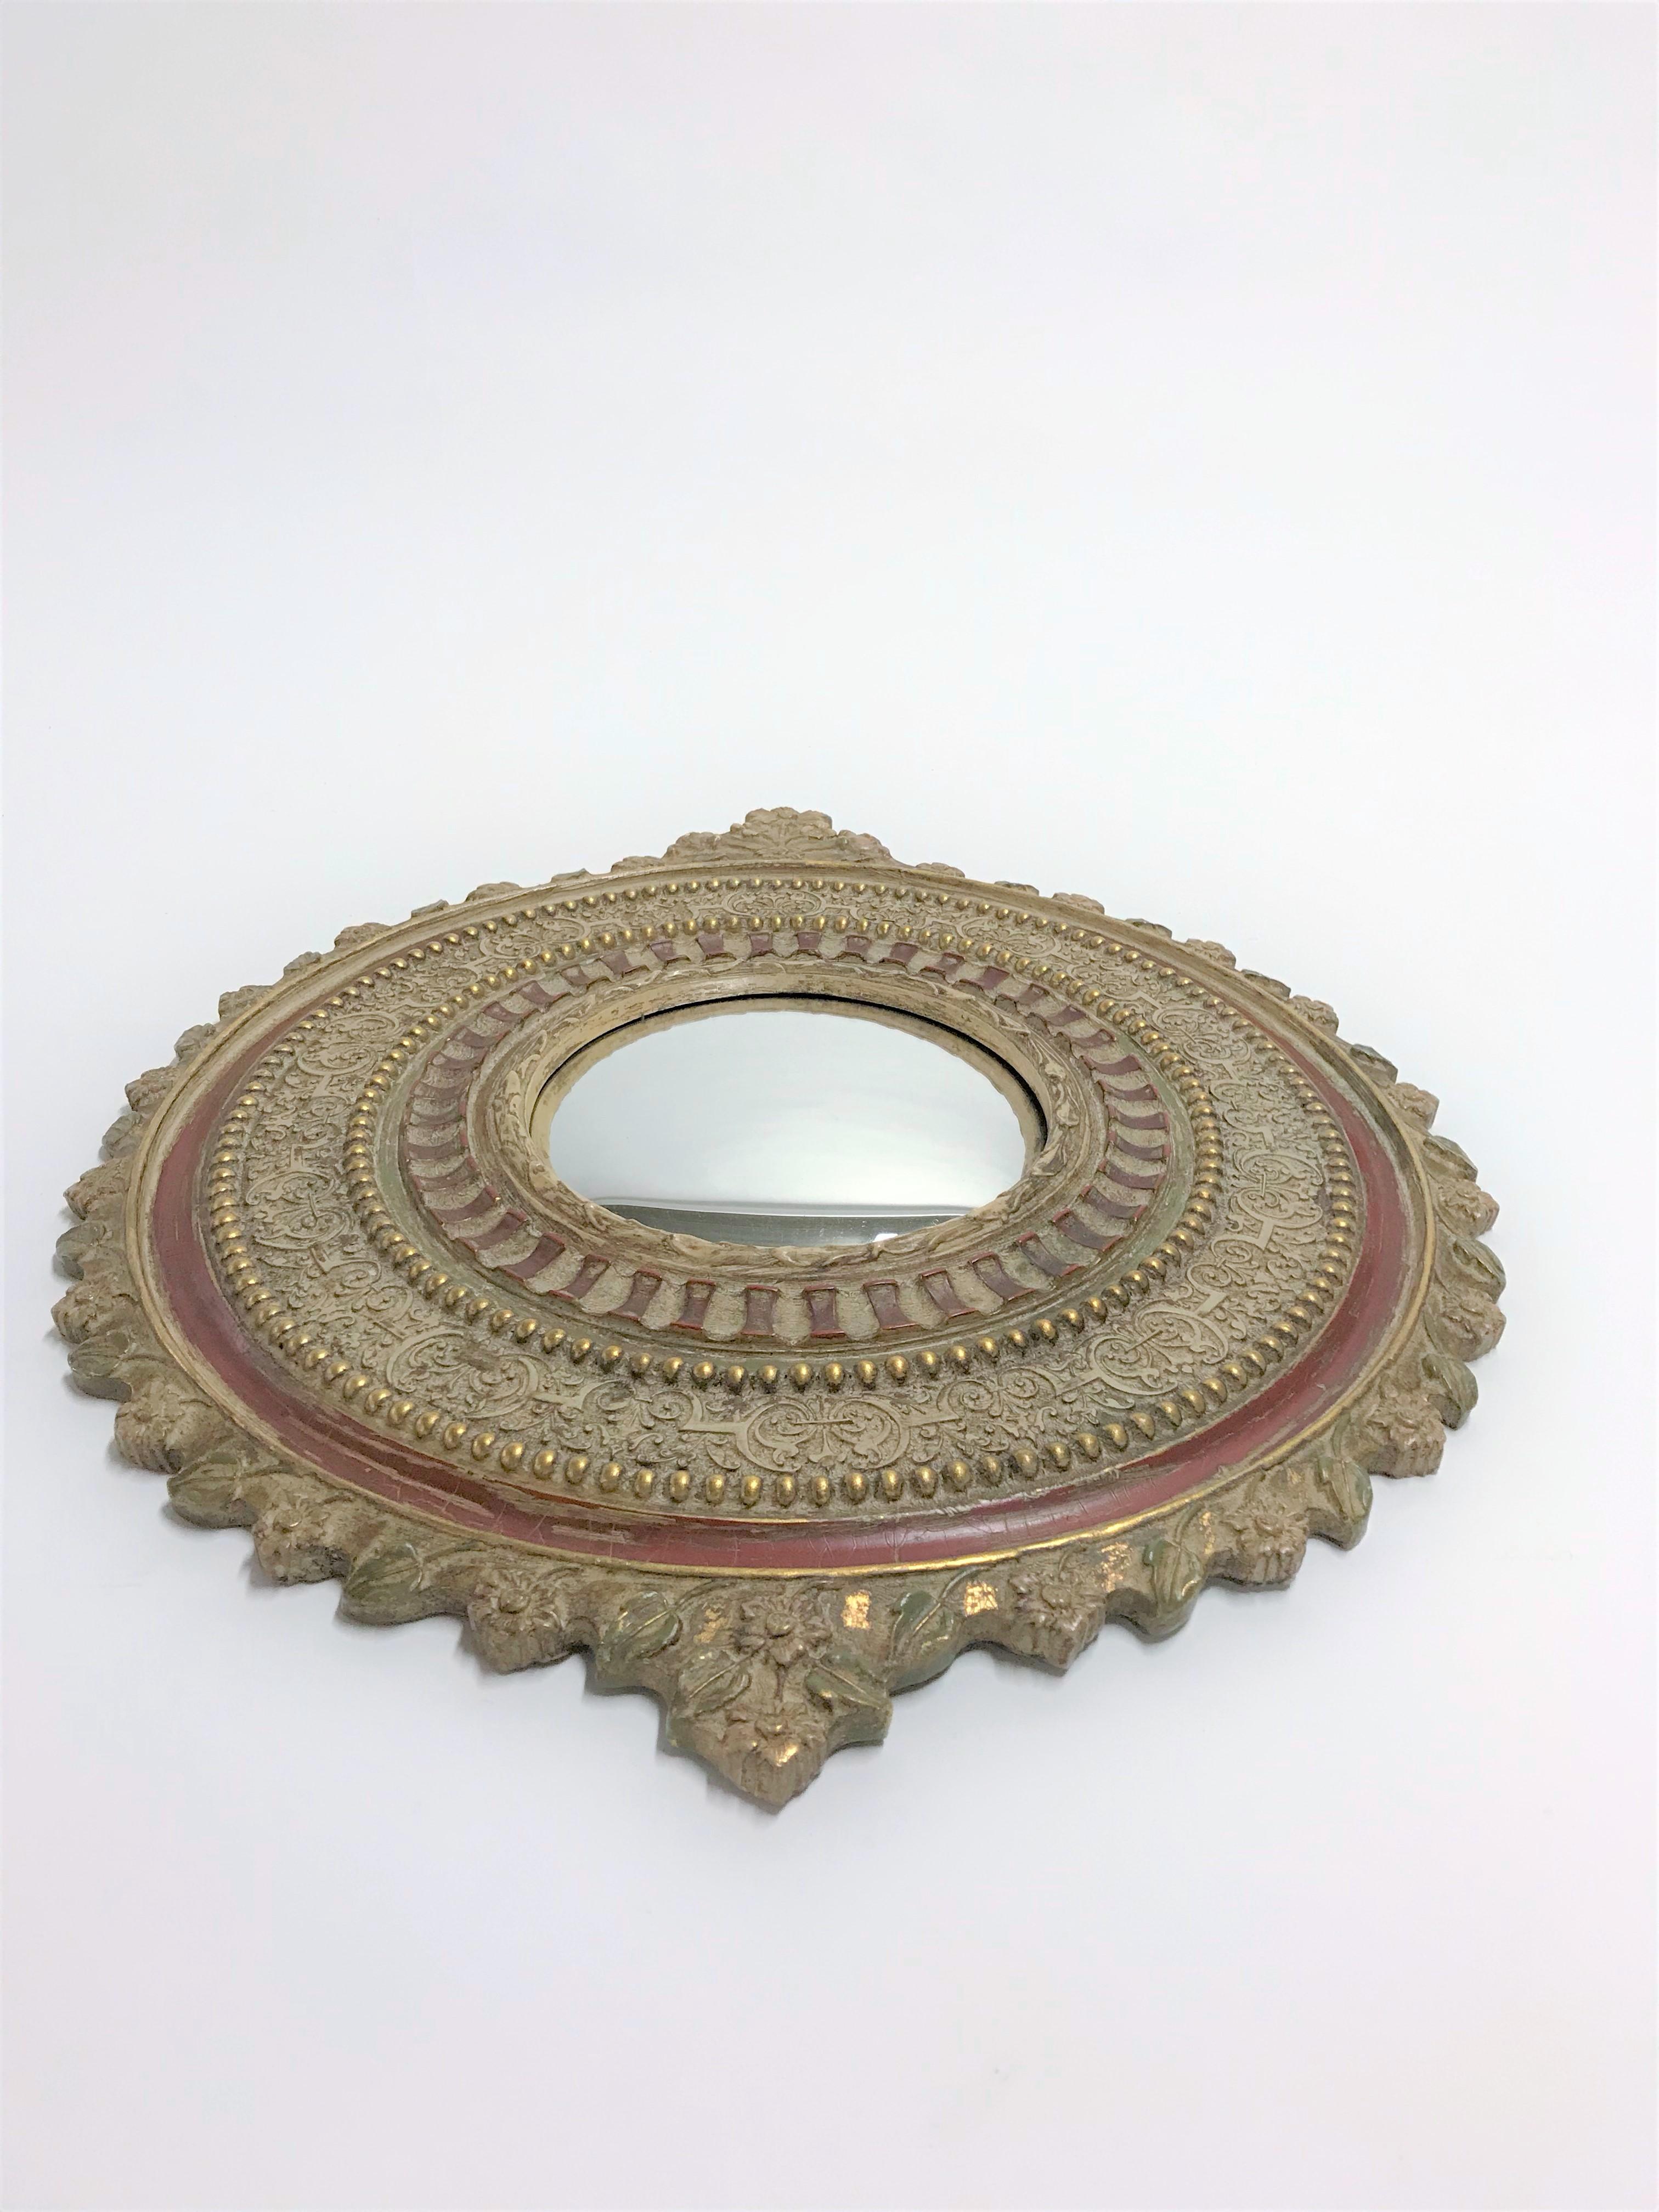 Vintage decorated convex mirror or butlers mirror.

The mirror is made from gilded resin and is decorated with flowers.

1950s, France

Measures: Diameter 57 cm/ 22